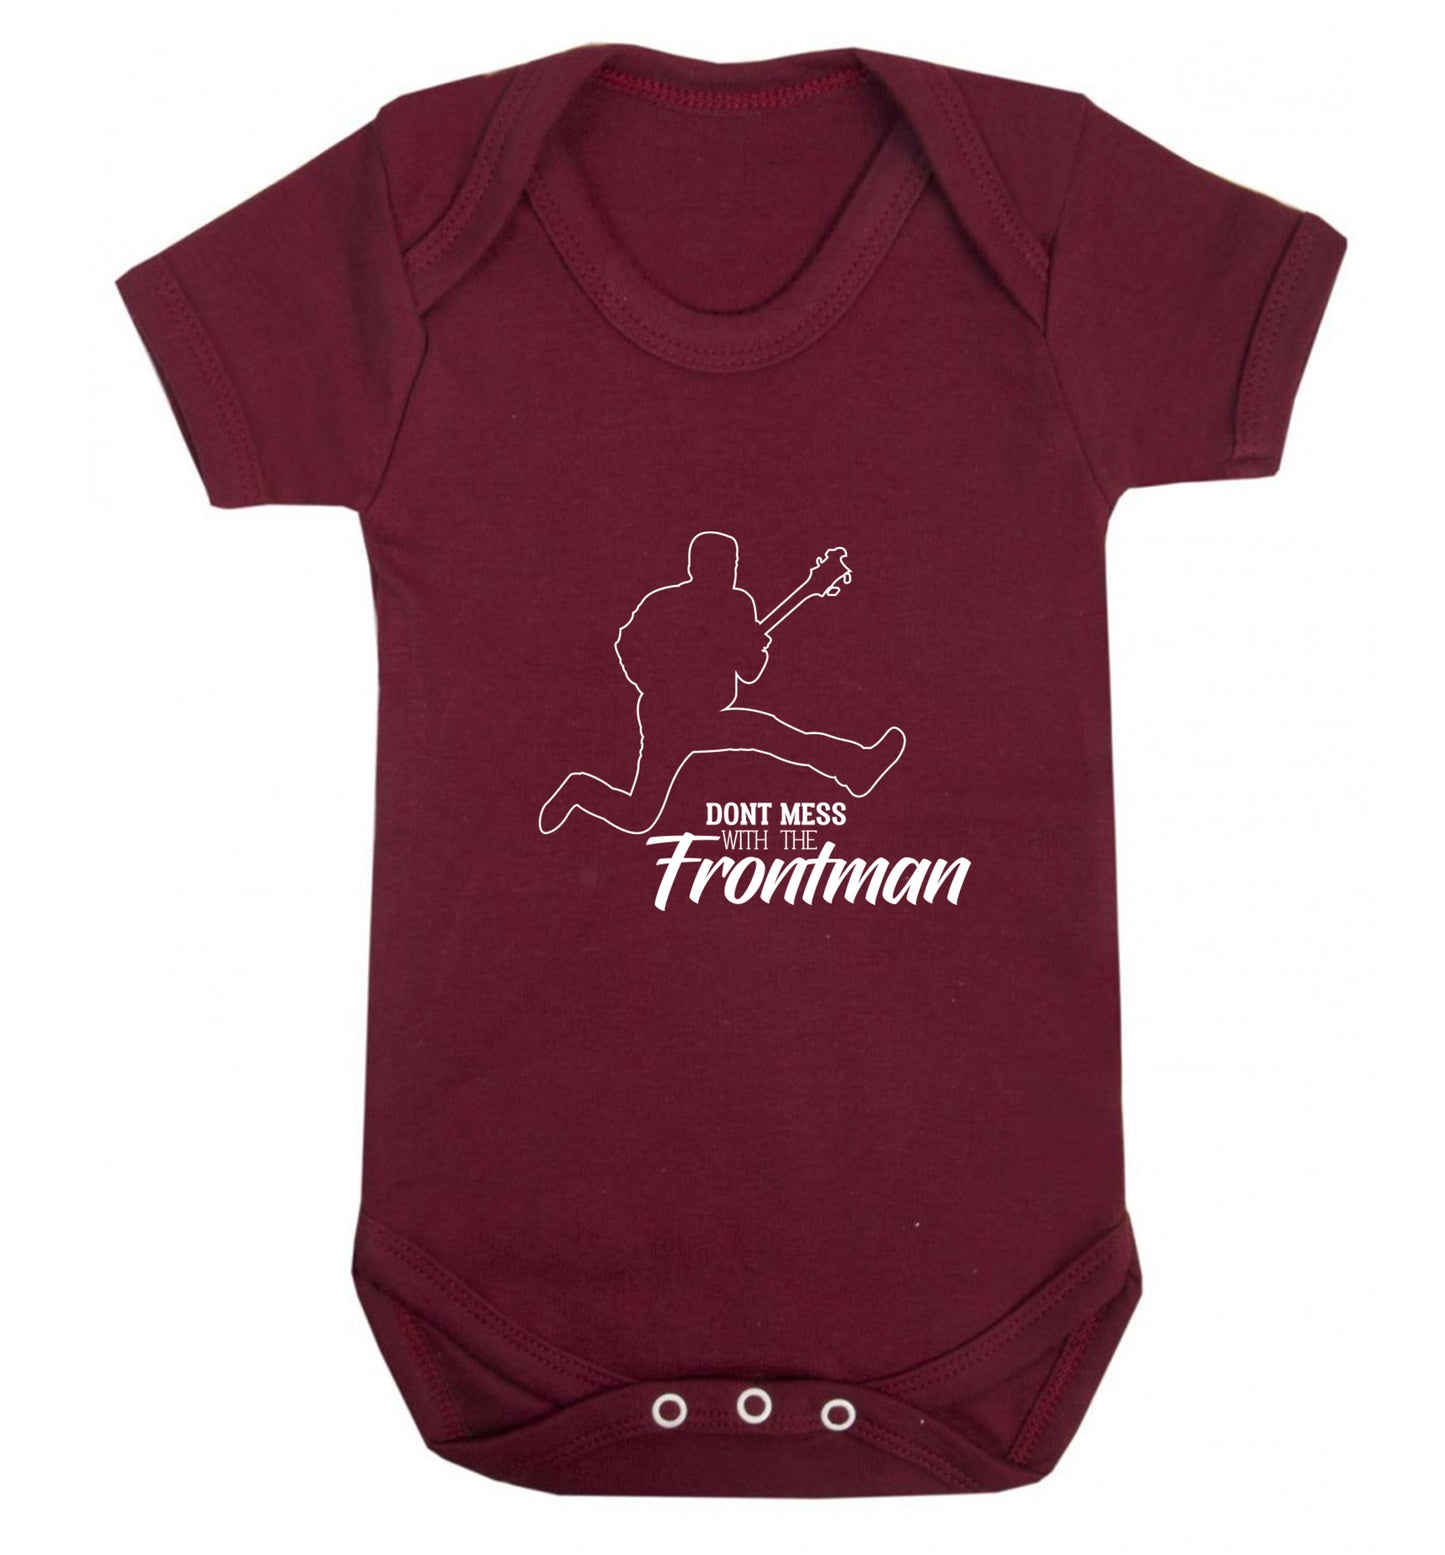 Don't mess with the frontman Baby Vest maroon 18-24 months